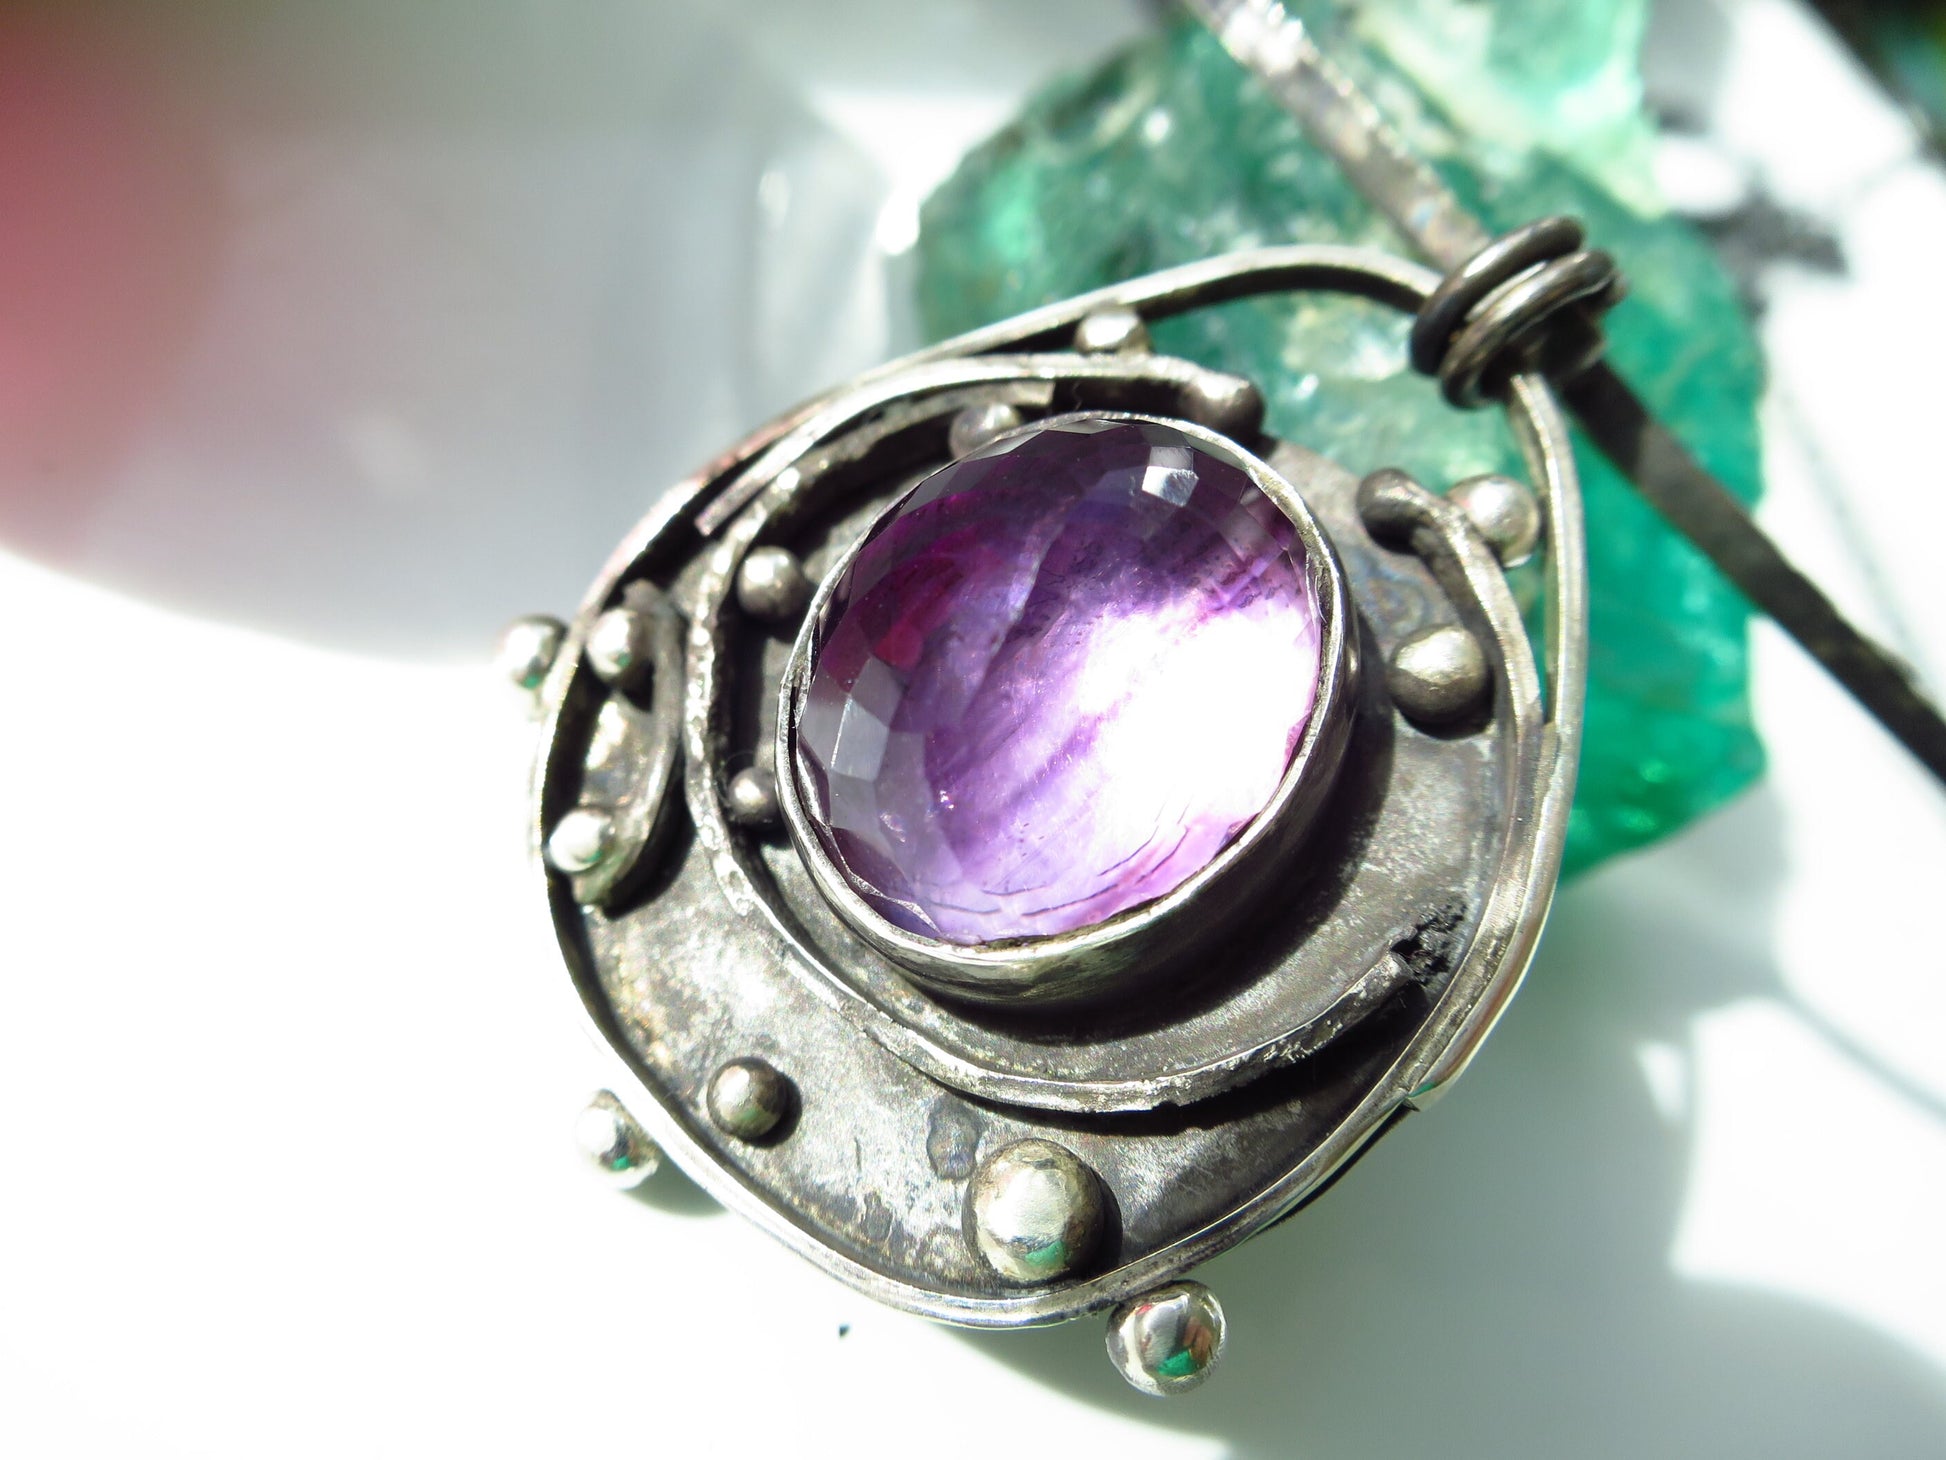 Purple Trace to the Timeline Amethyst Pendant Collier amethyst natural gemstone pendant set in 925 sterling silver with tourmaline drop